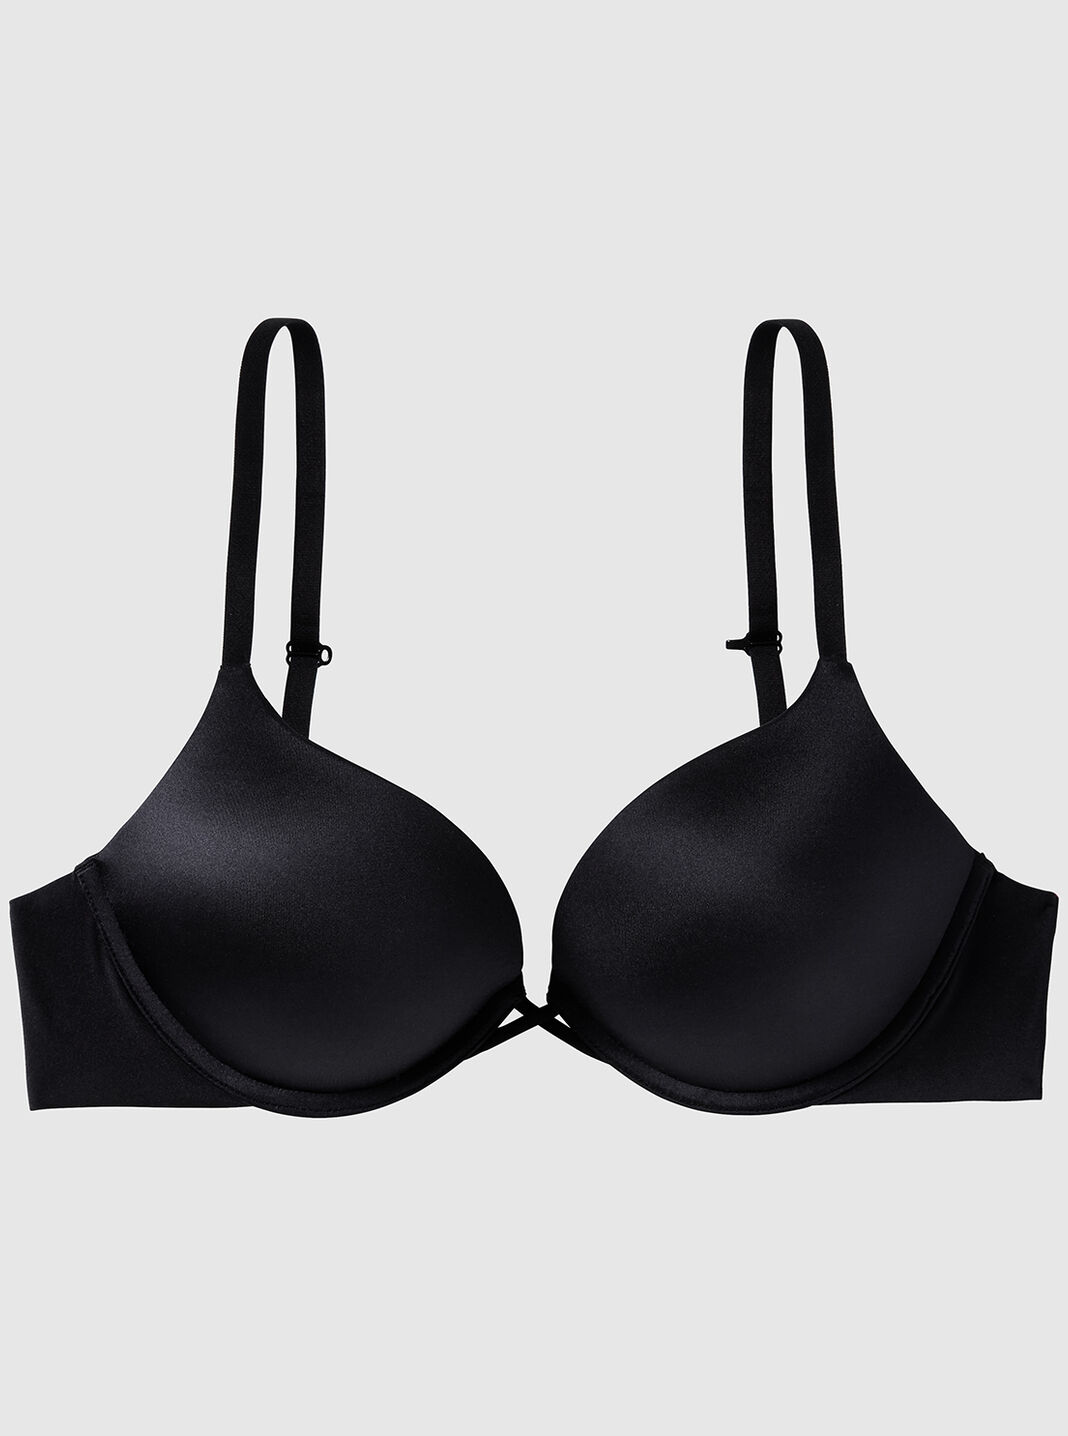 Hello Sugar Collection, Extreme Push Up Bras